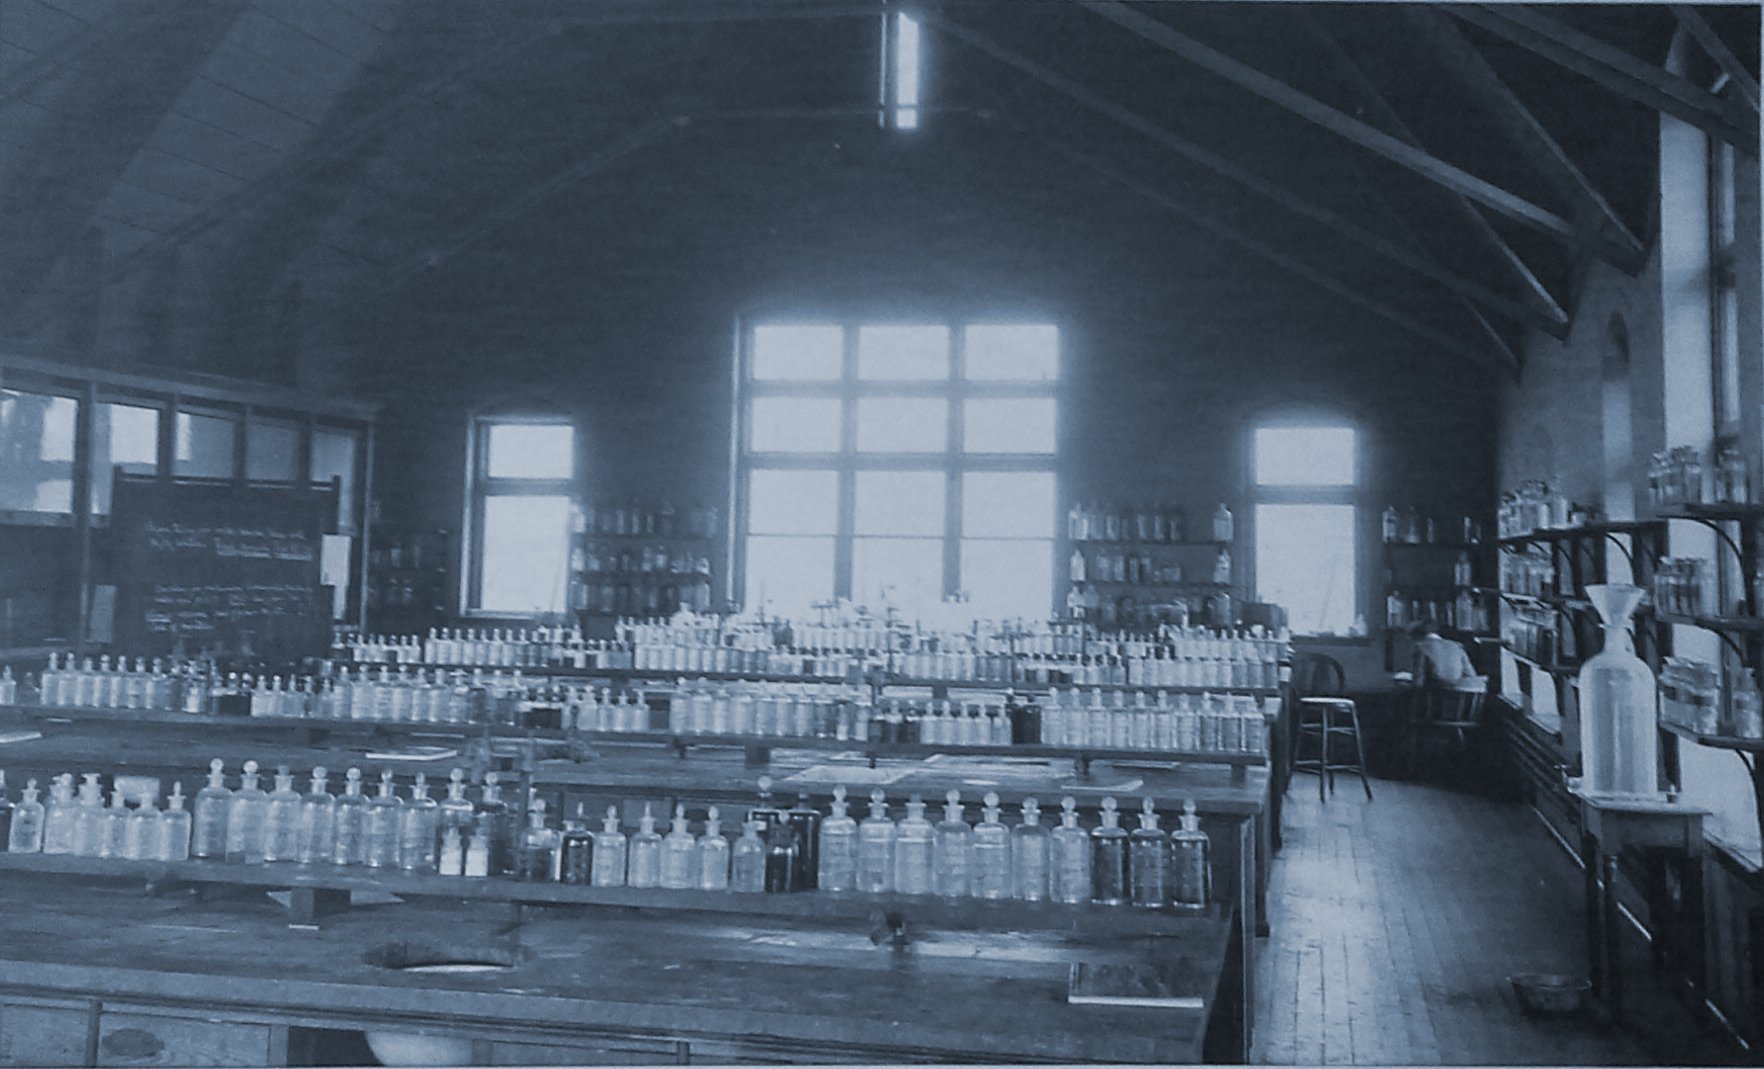 Third slide; Photograph of the Major Chemistry Lab in Dalton Hall c. 1900 at Bryn Mawr College